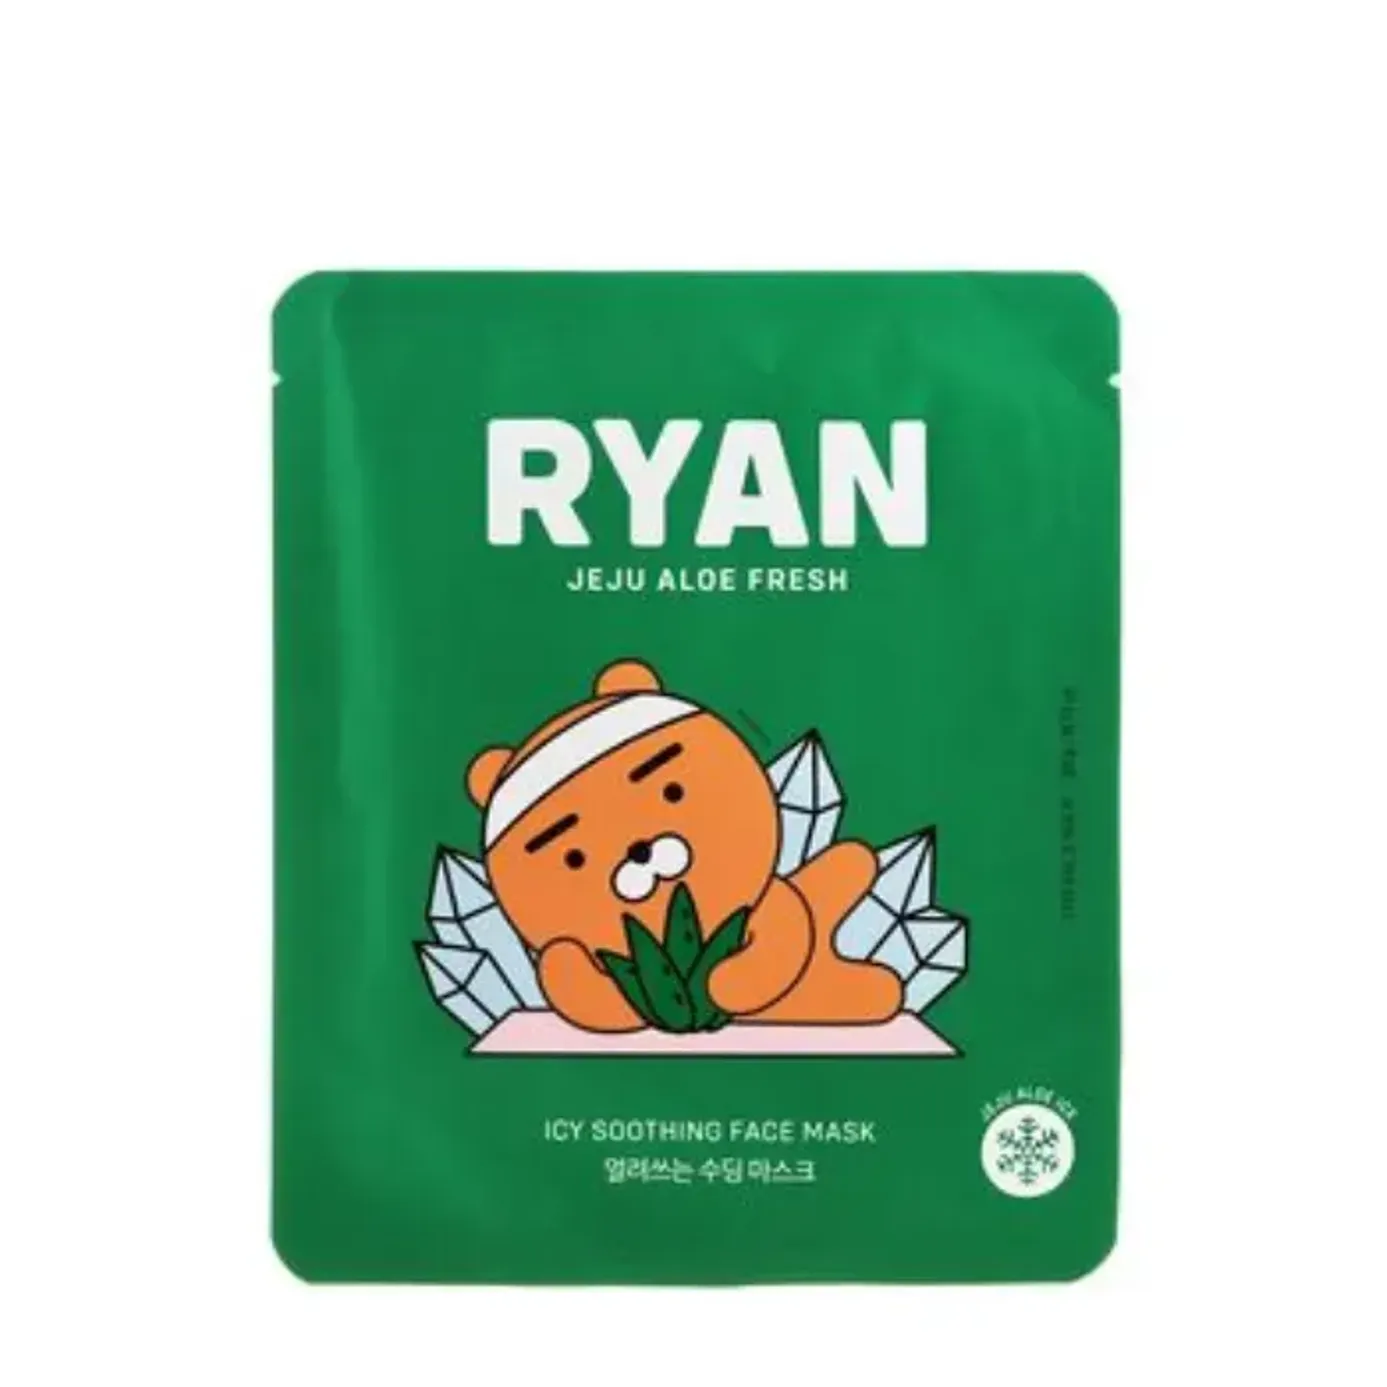 Mặt Nạ RYAN JEJU ALOE FRESH ICY SOOTHING FACE MASK 22g